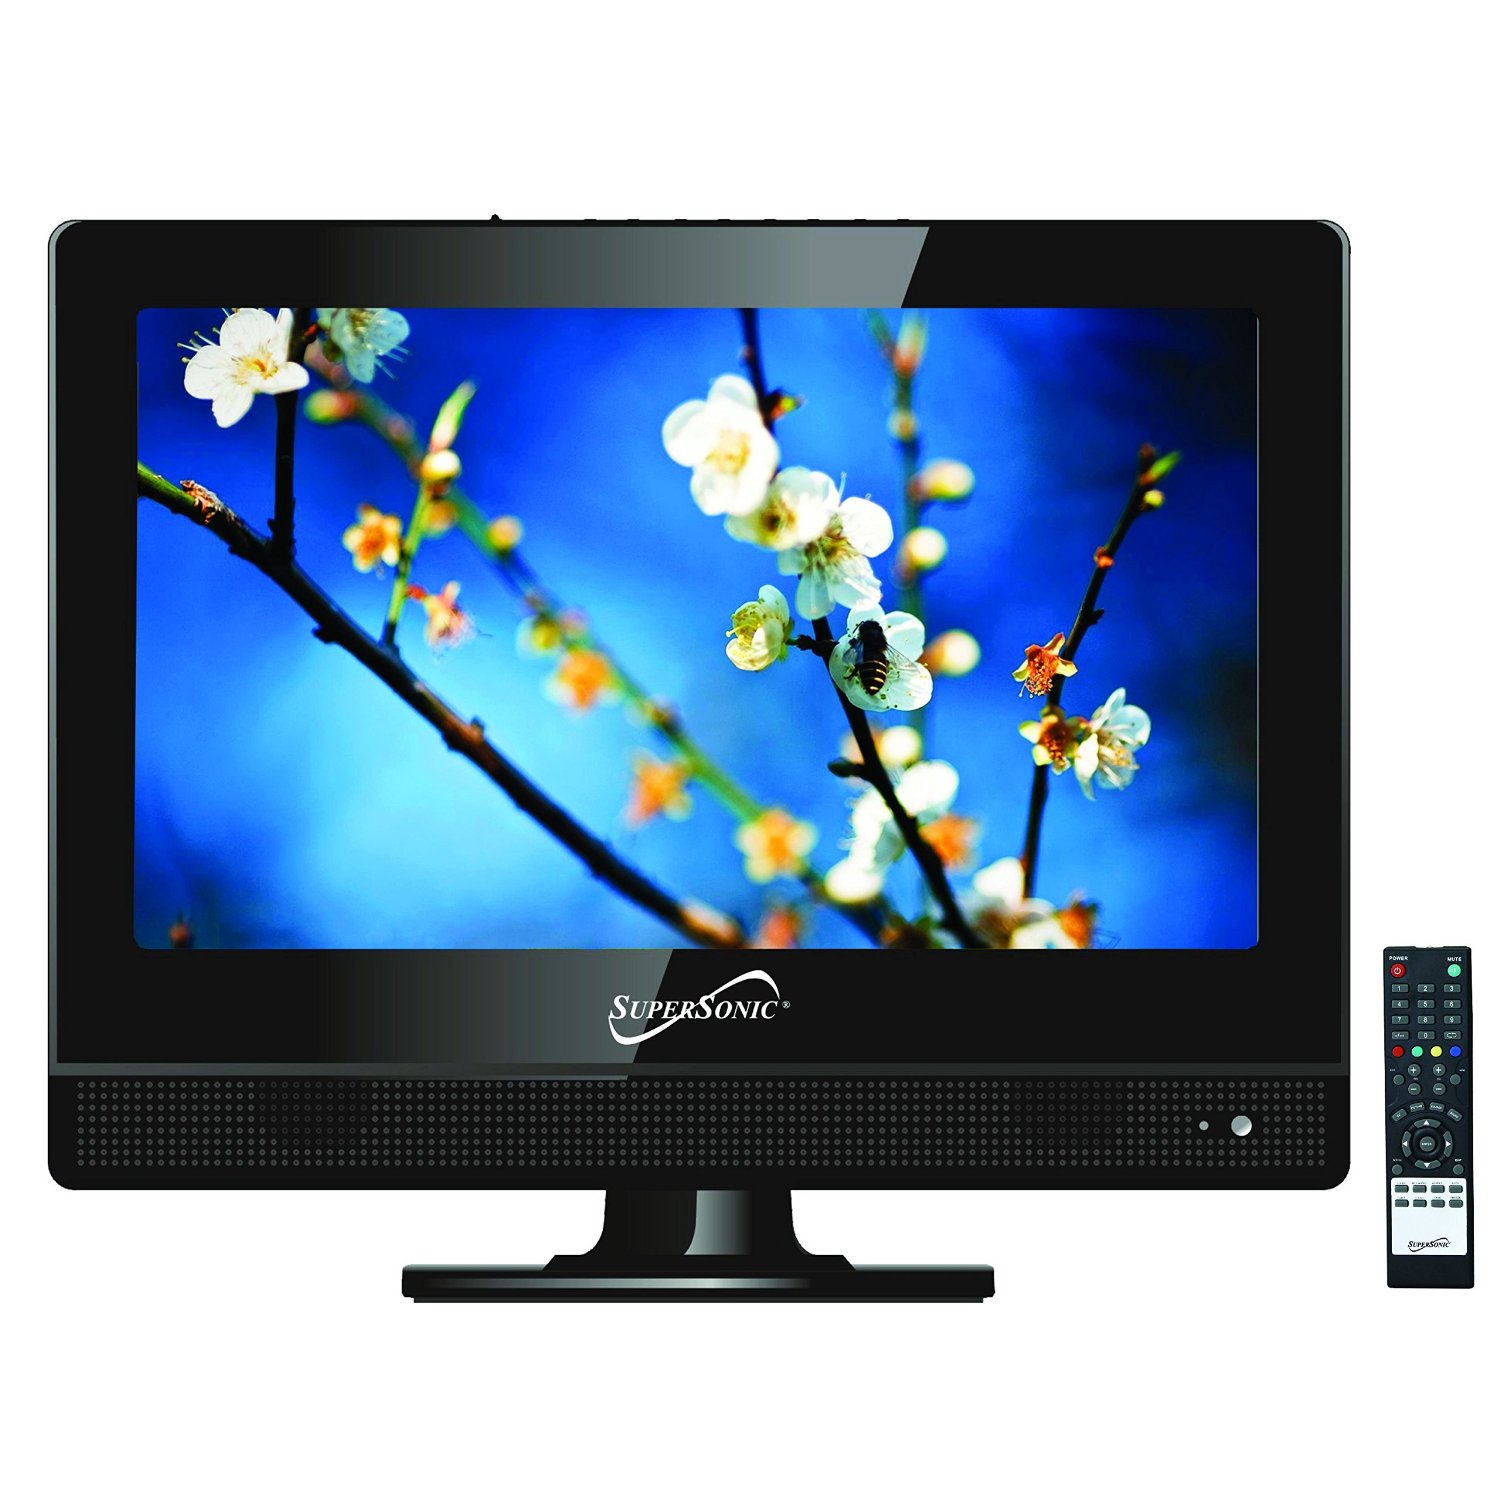 13" Widescreen Ac/dc Led Hdtv - image 1 of 2